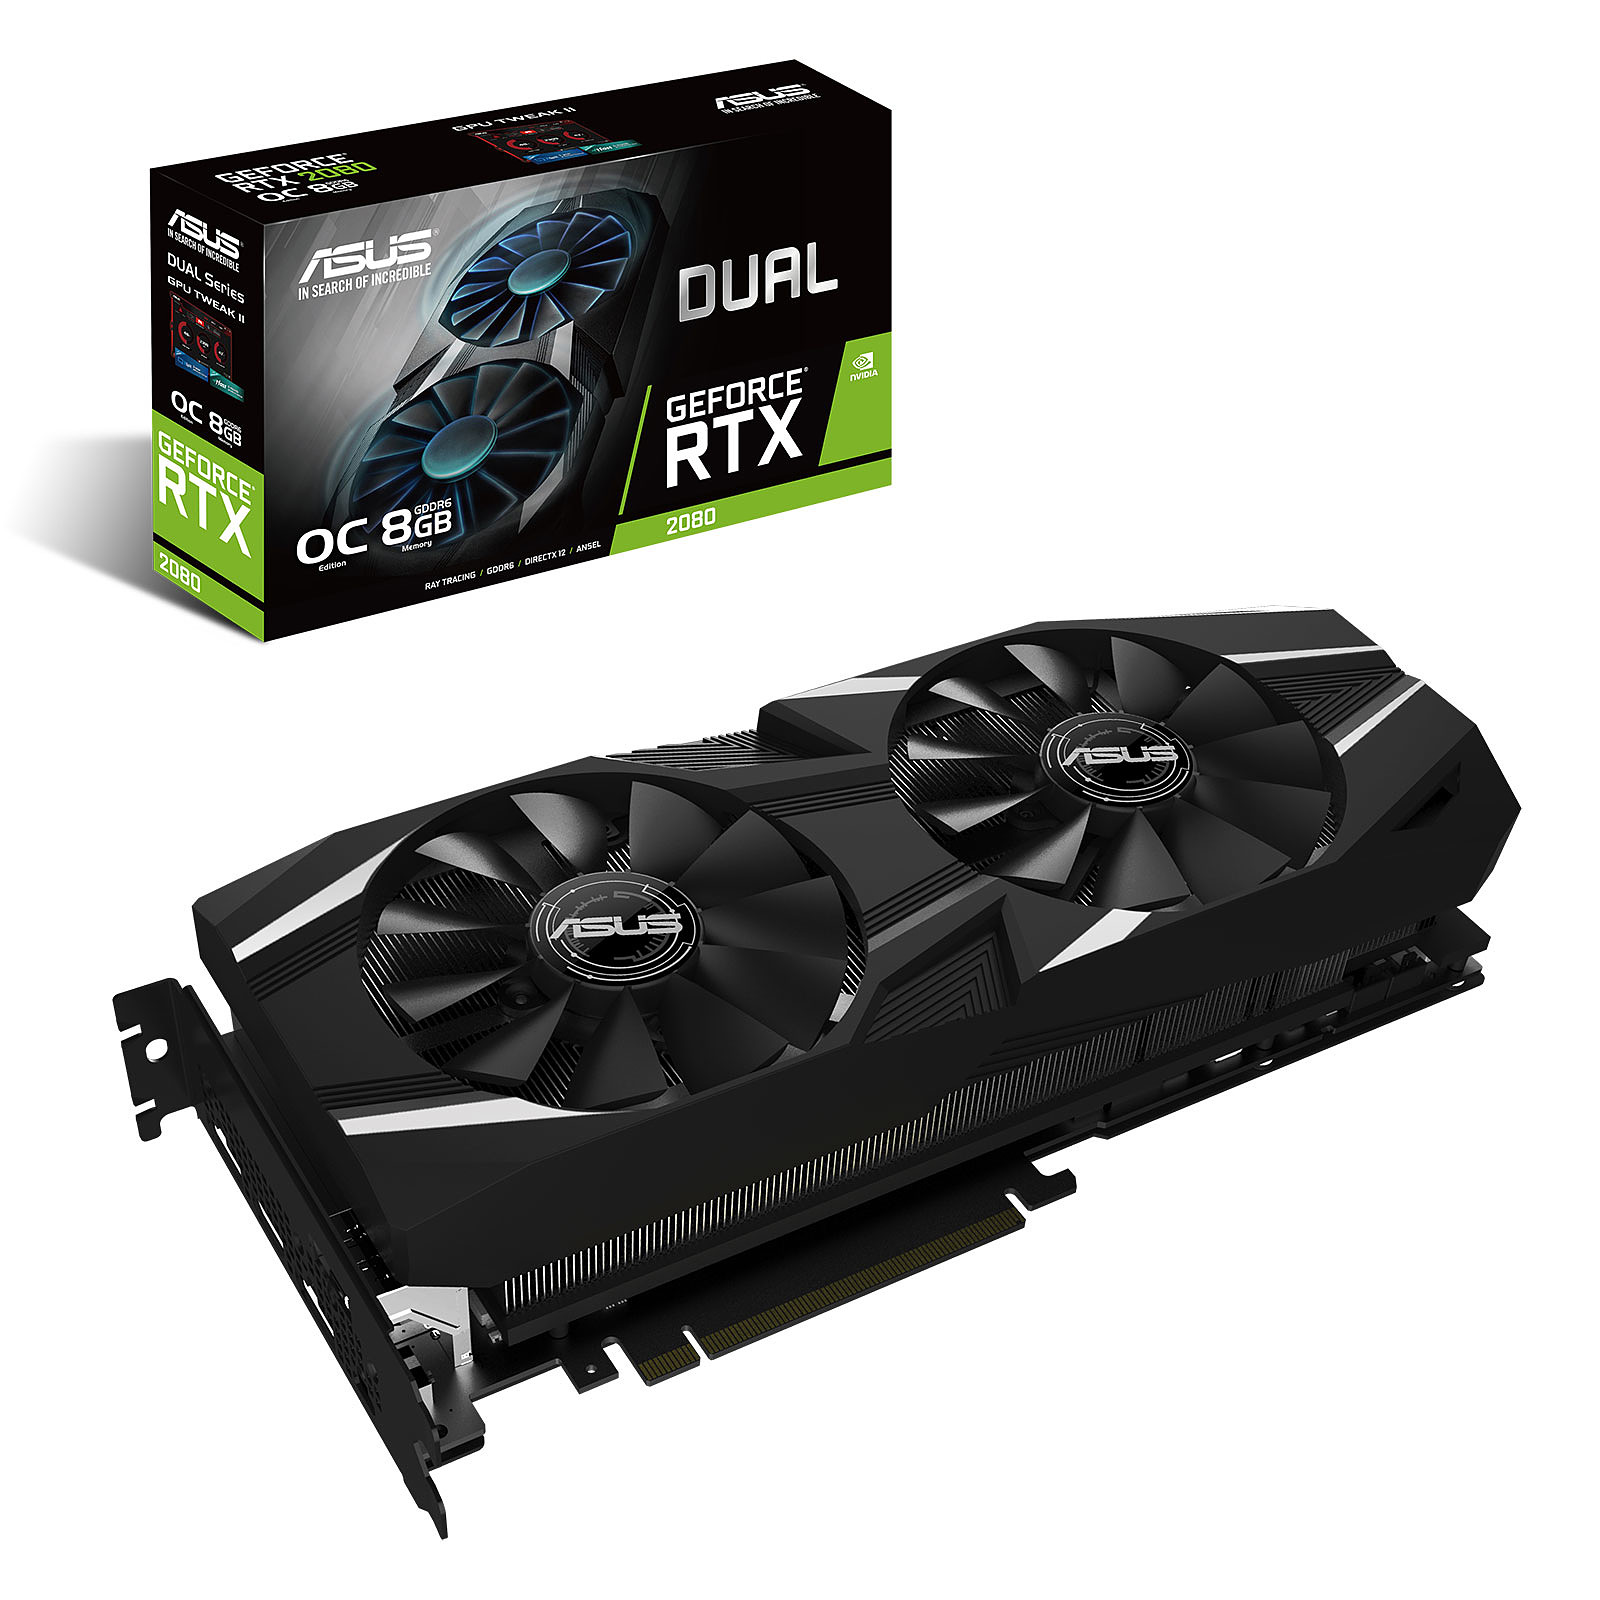 ASUS GeForce RTX 2080 DUAL-RTX2080-O8G · Occasion - Carte graphique ASUS - Occasion